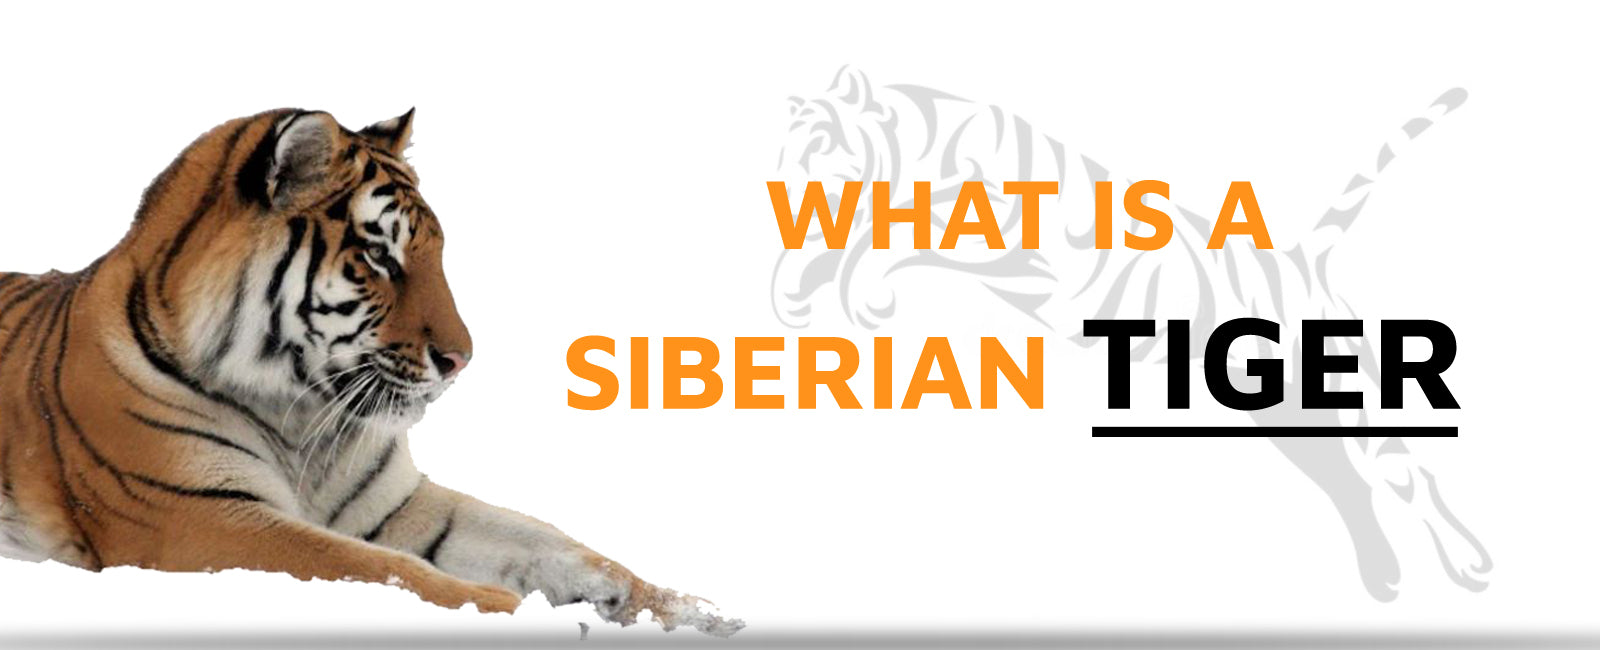 What is a Siberian Tiger